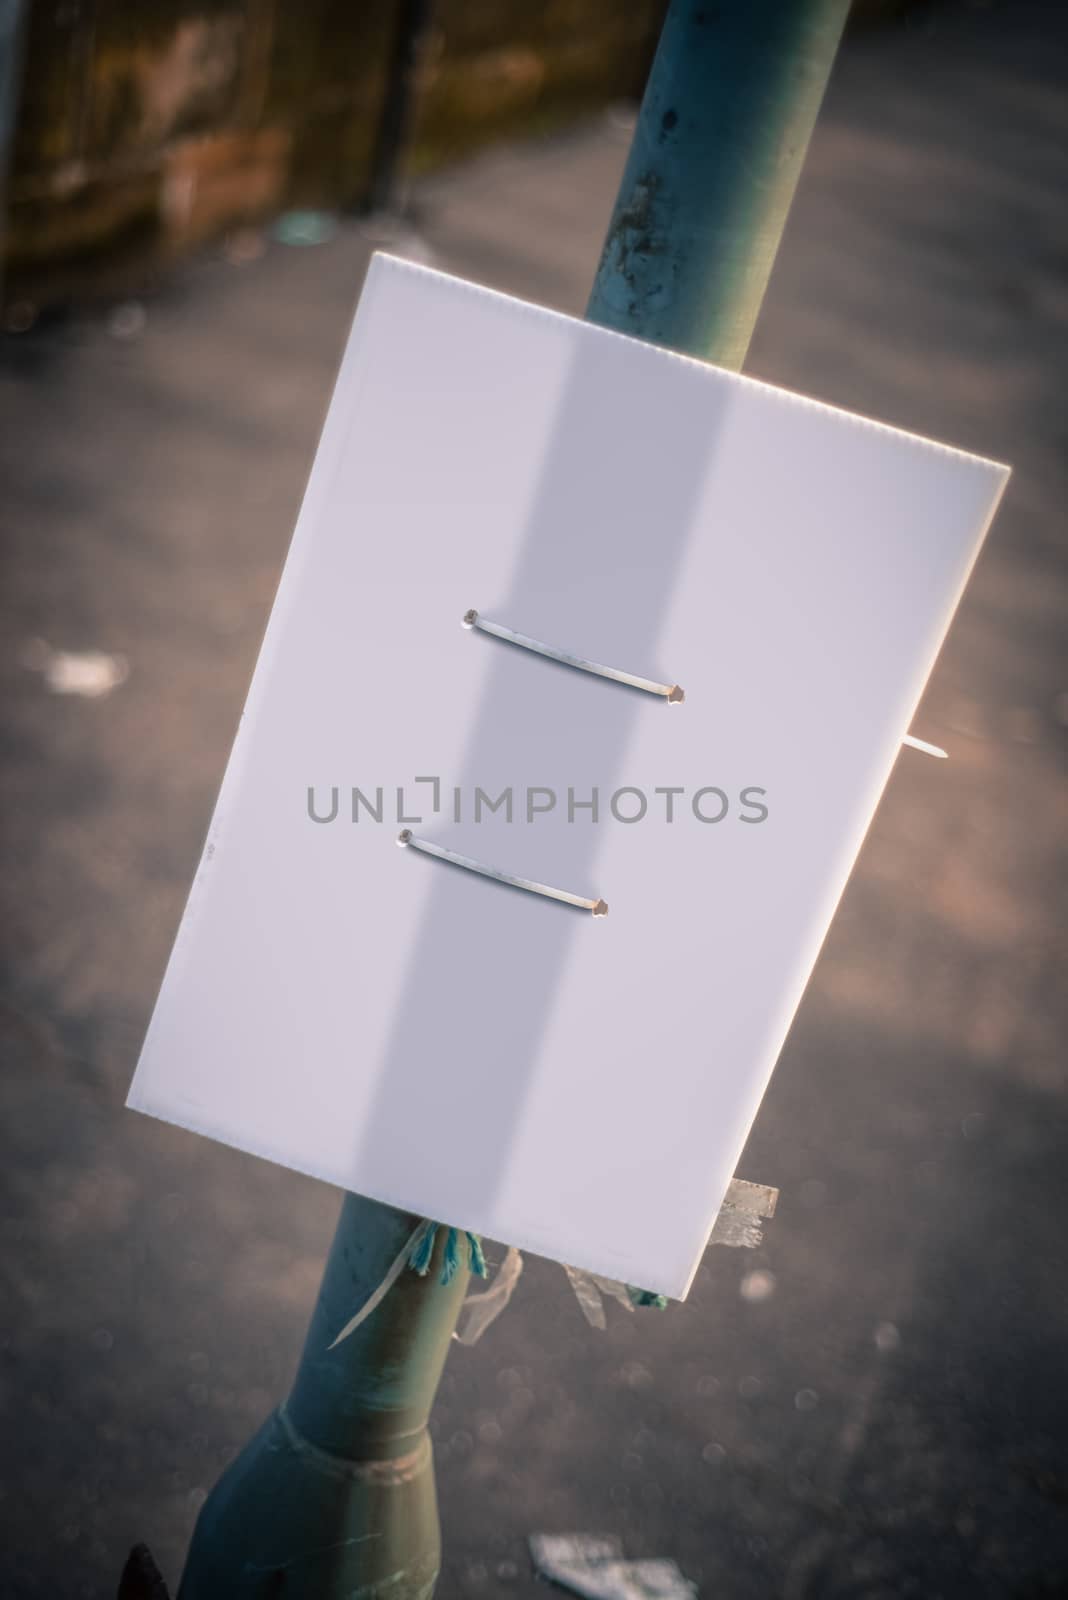 Retro Grungy Street Sign On A Lamppost Blank For Your Text